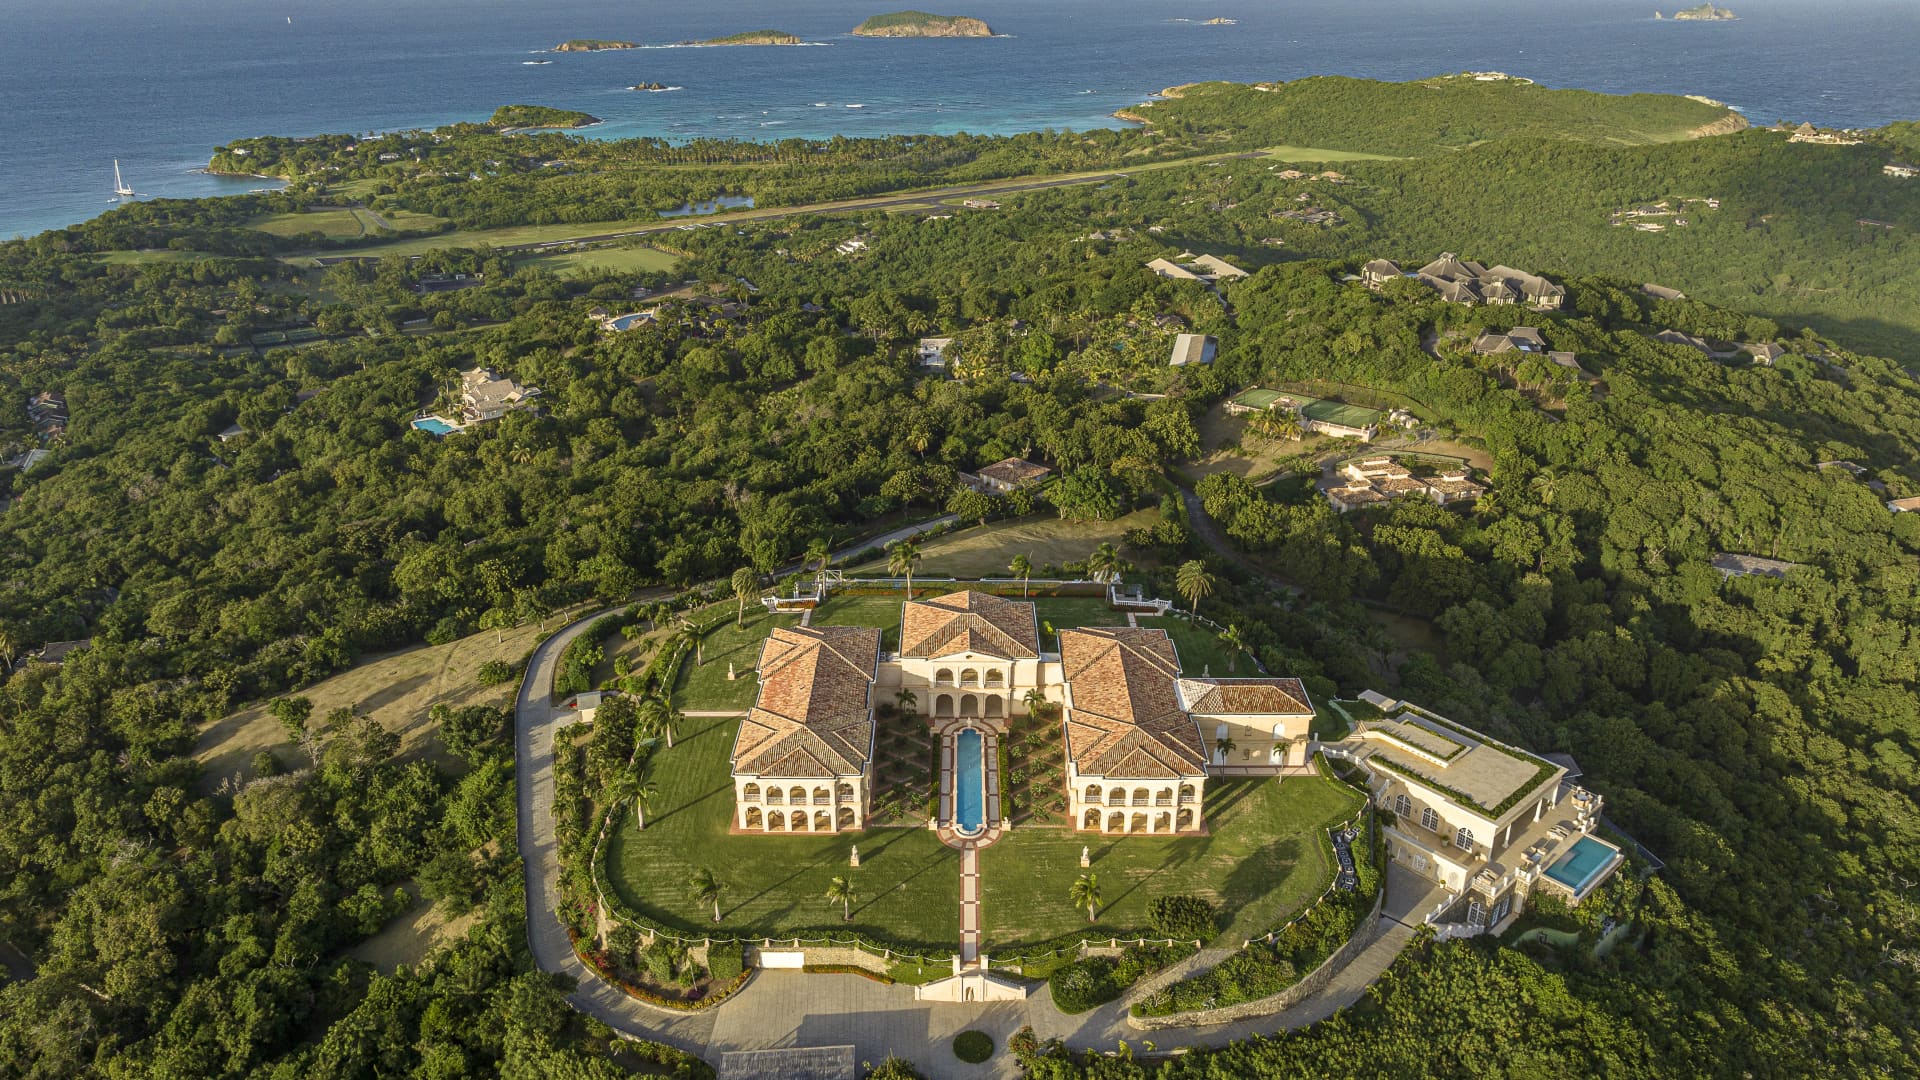 The estate sits atop Endeavor Hill, one of Mustique's highest summits.